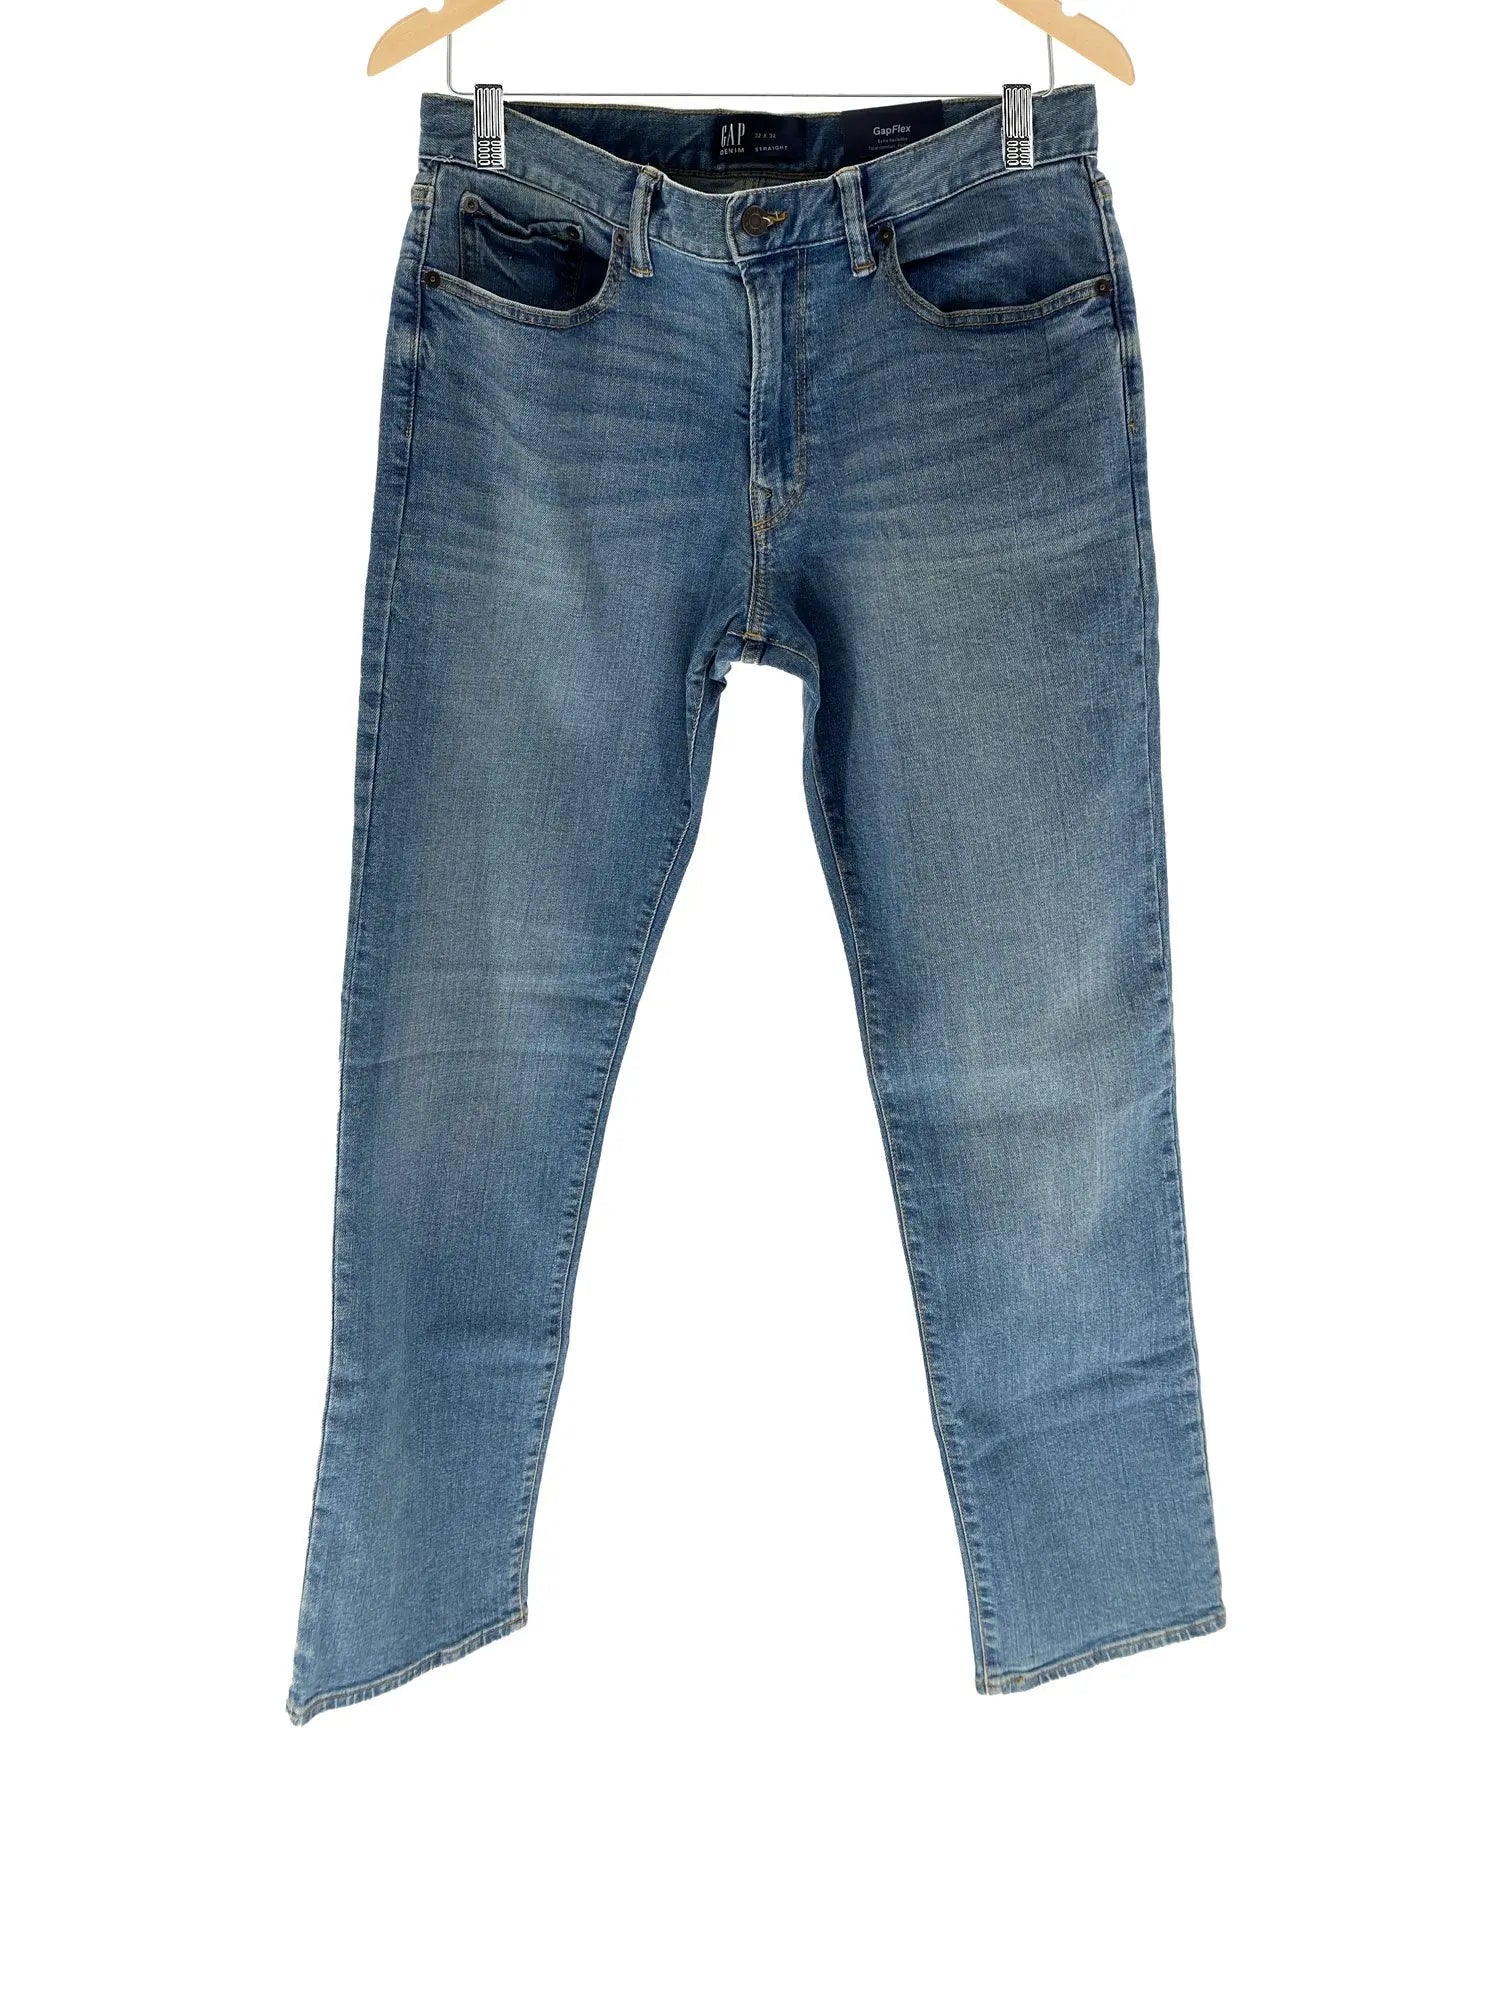 GapFlex Straight Jeans - Men's - New with Tags Great Lakes Reclaimed Denim